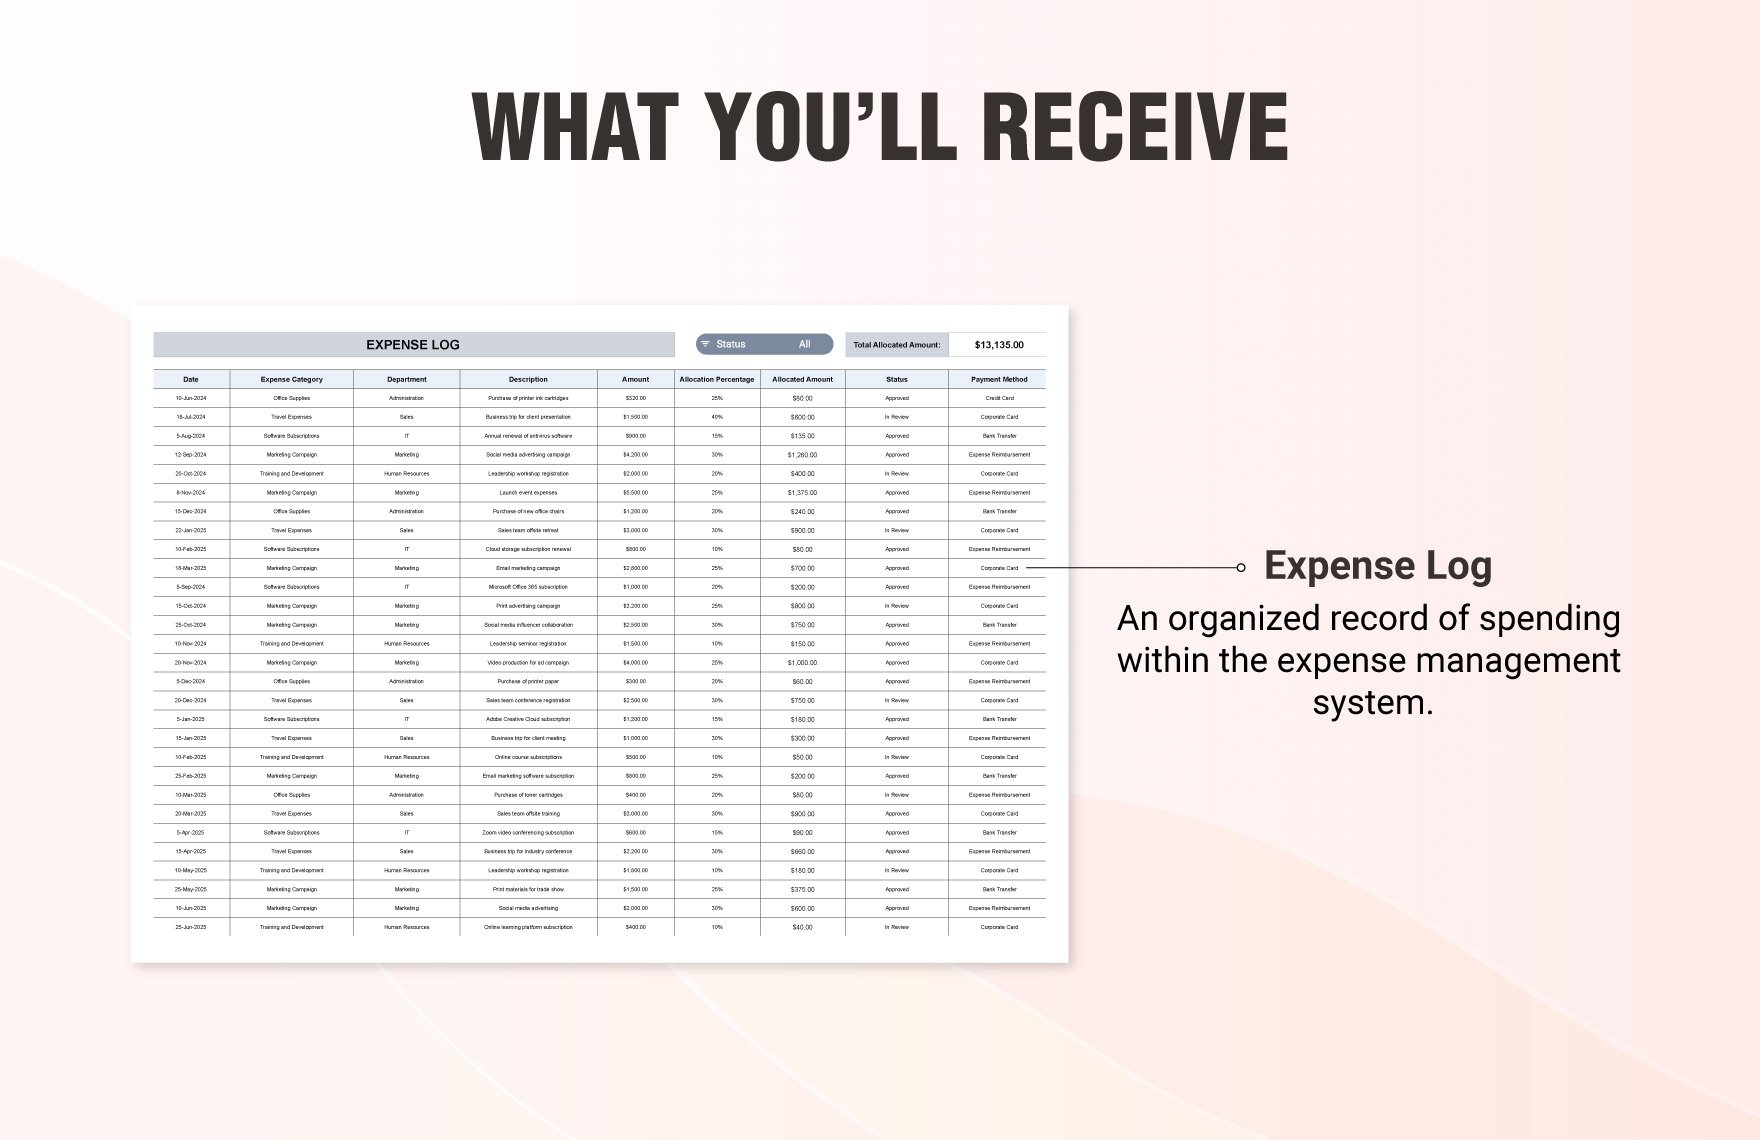 Expense Allocation and Management Template